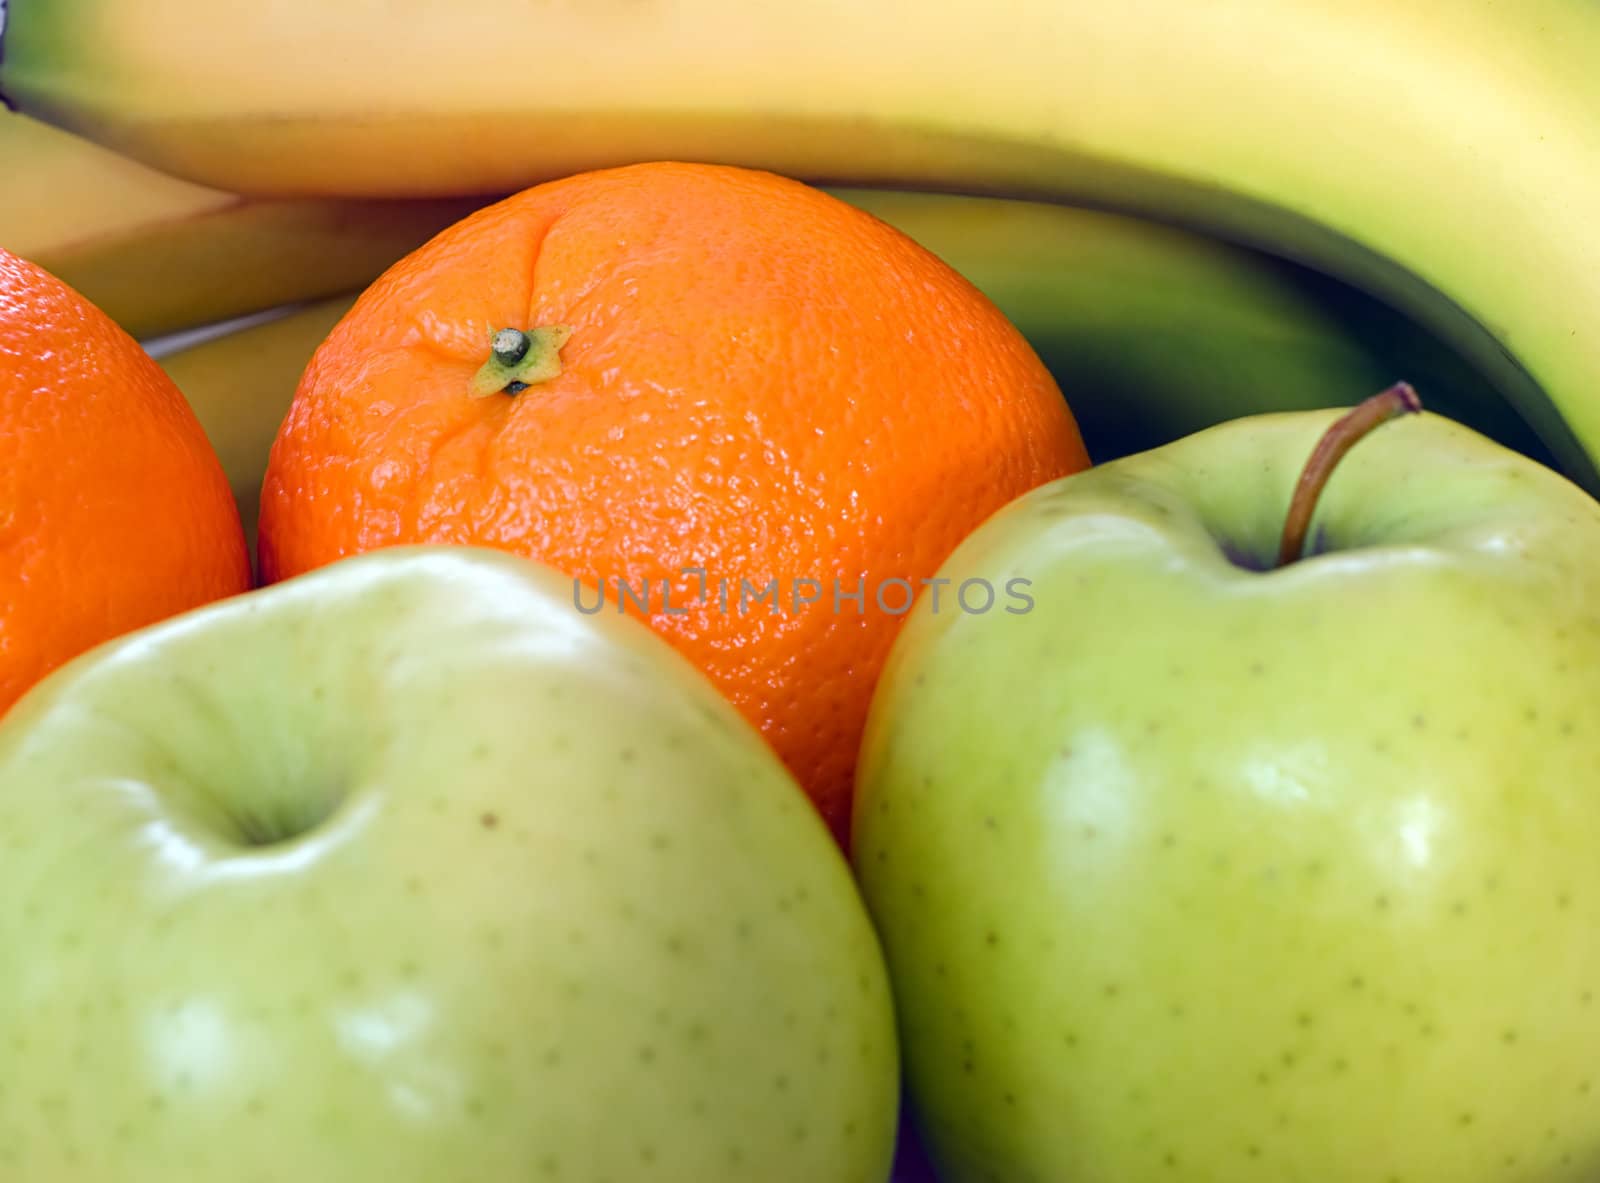 A background made of assorted fruit including apples, oranges and bananas